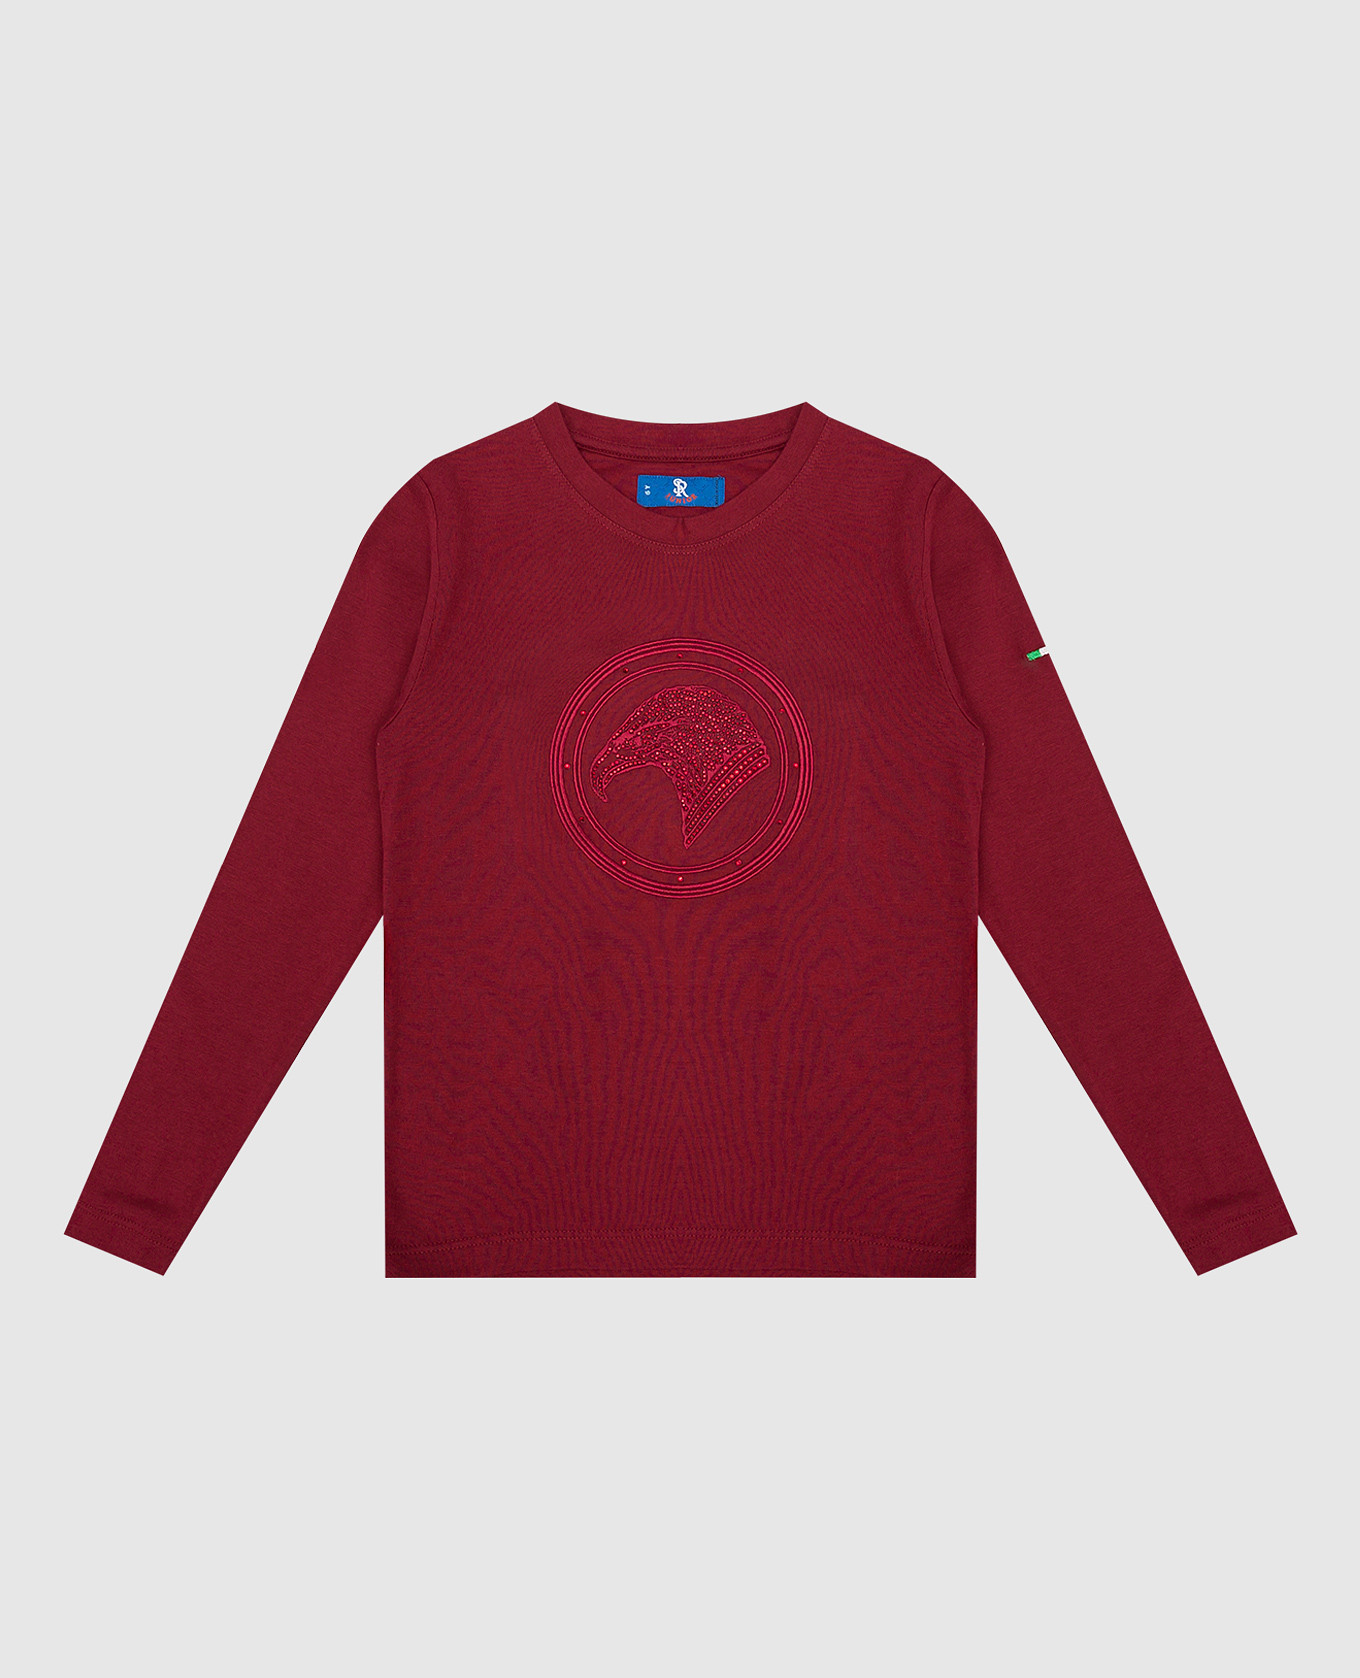 Children's burgundy longsleeve with embroidery and crystals